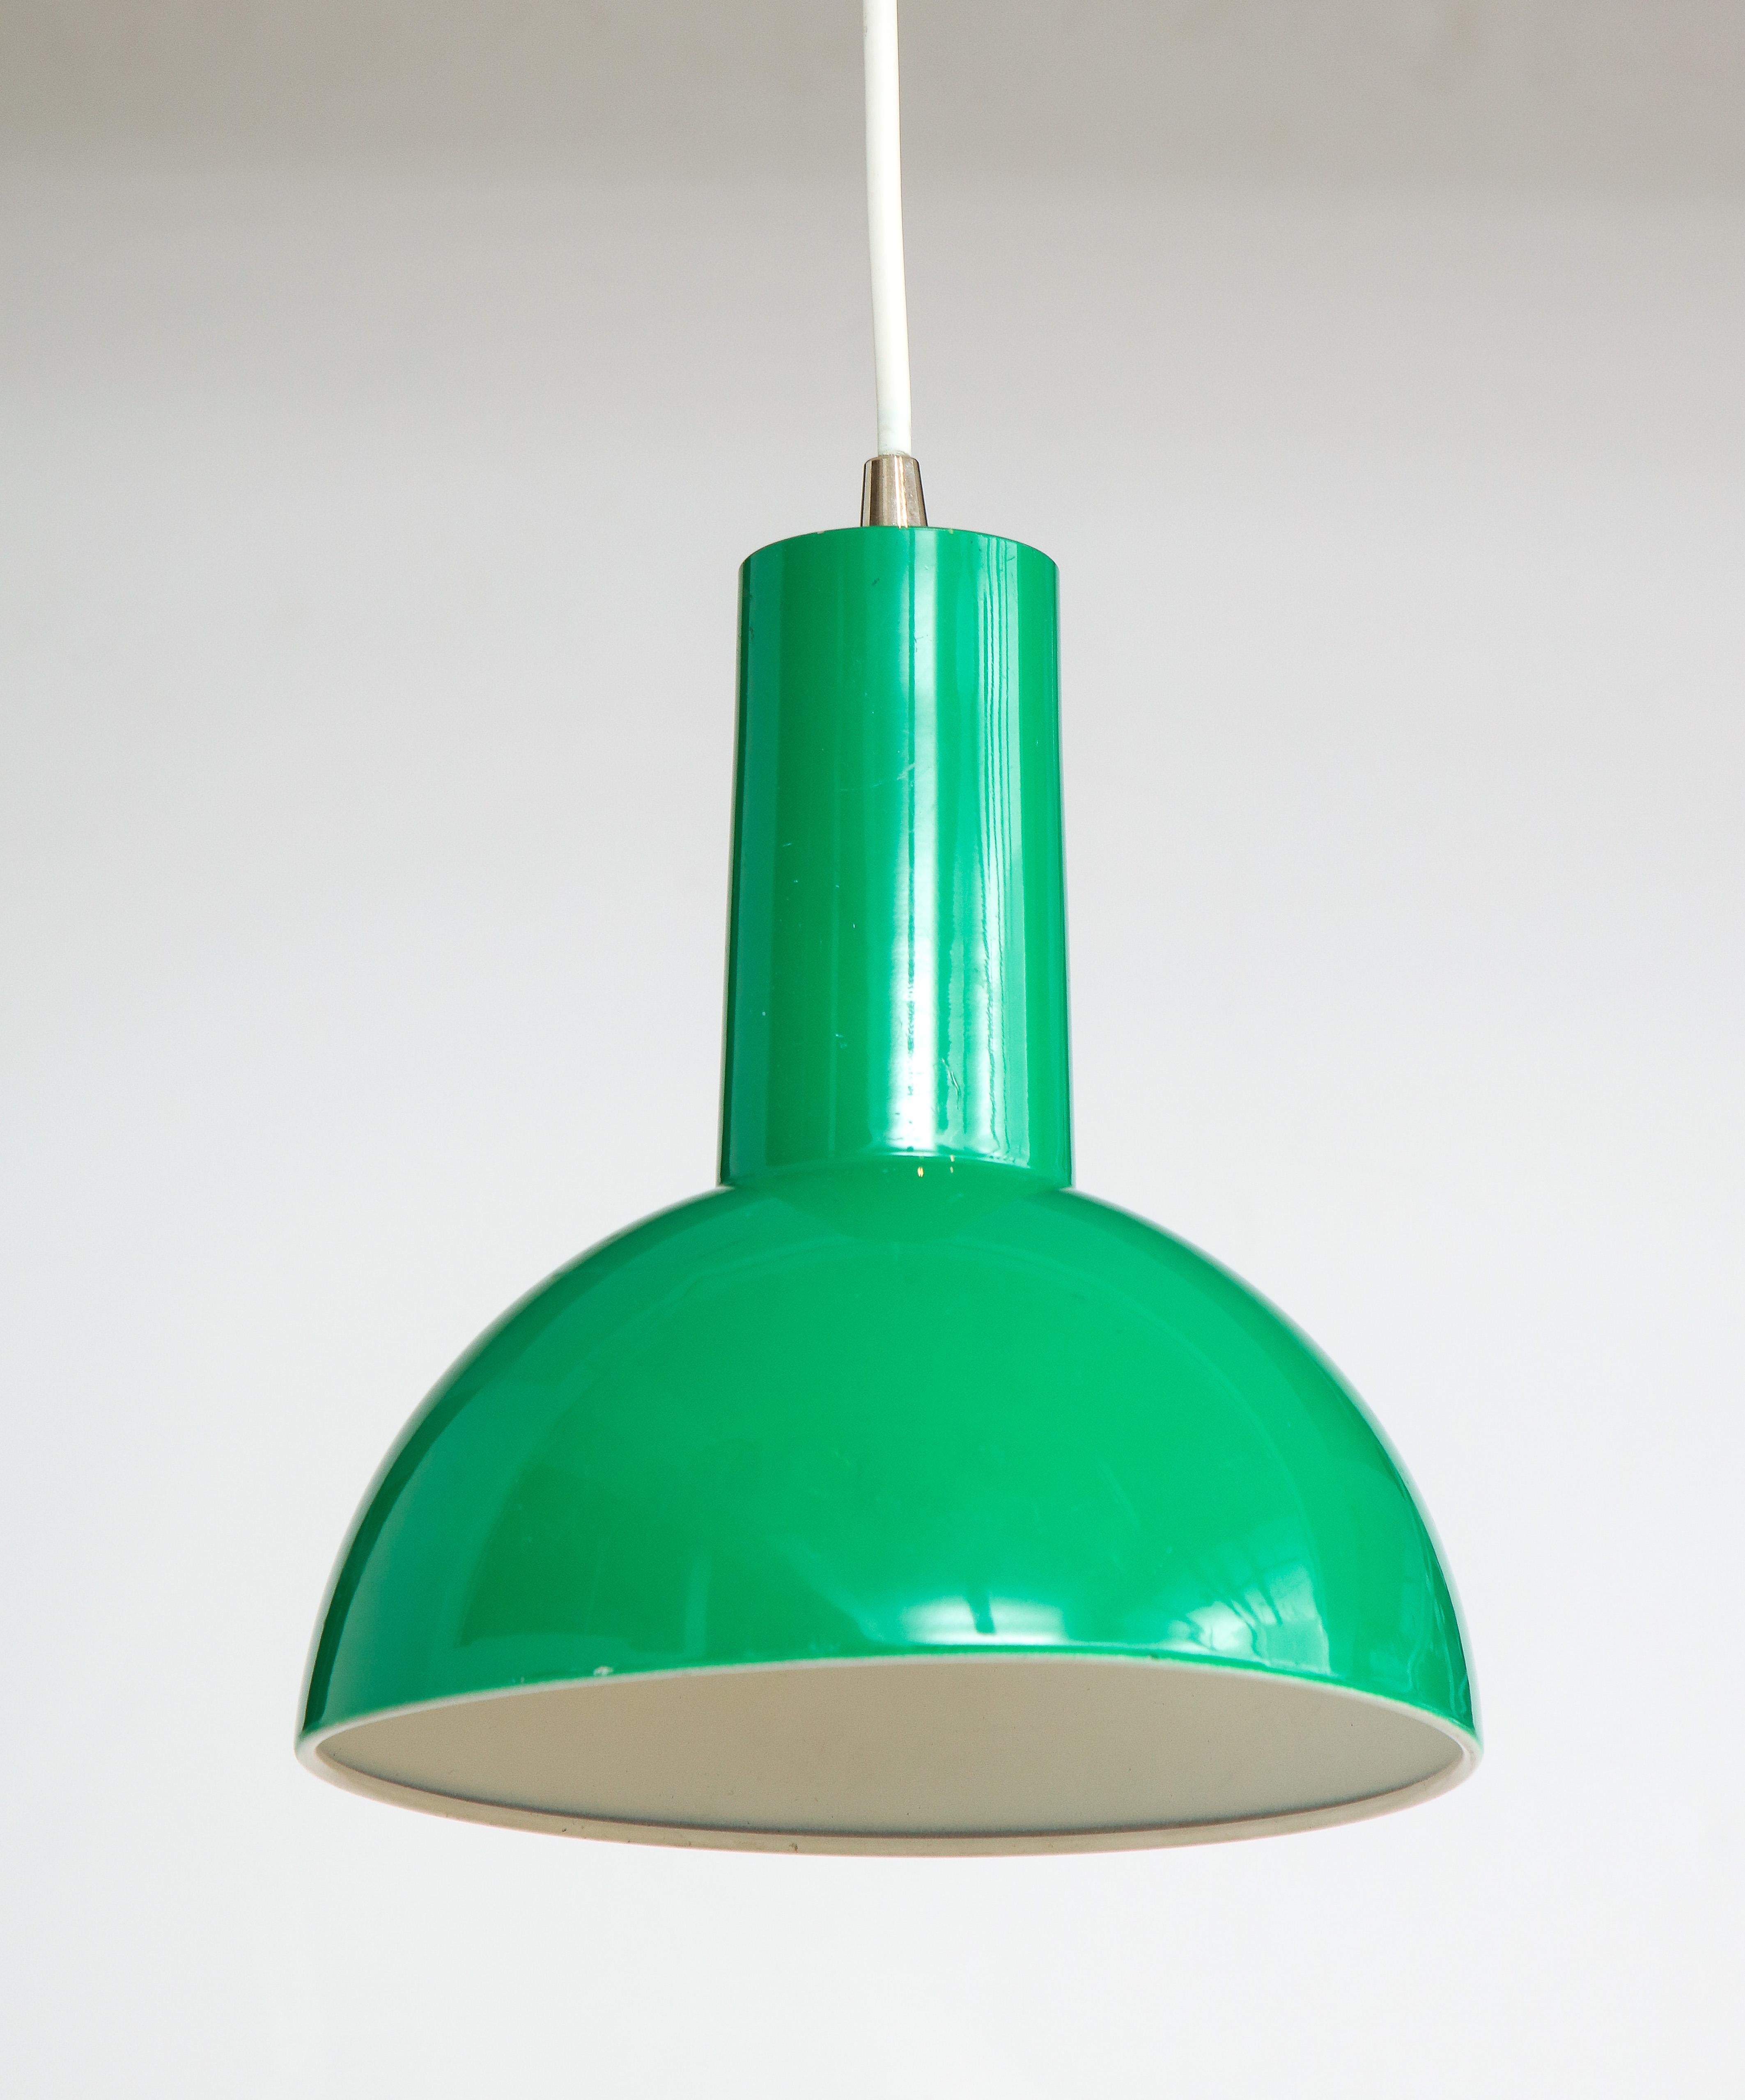 Danish Green mid century dome pendant with white cord, c. 1960
Tole, enamel
Measures: Height: 9 Diameter. 9 in.
?.